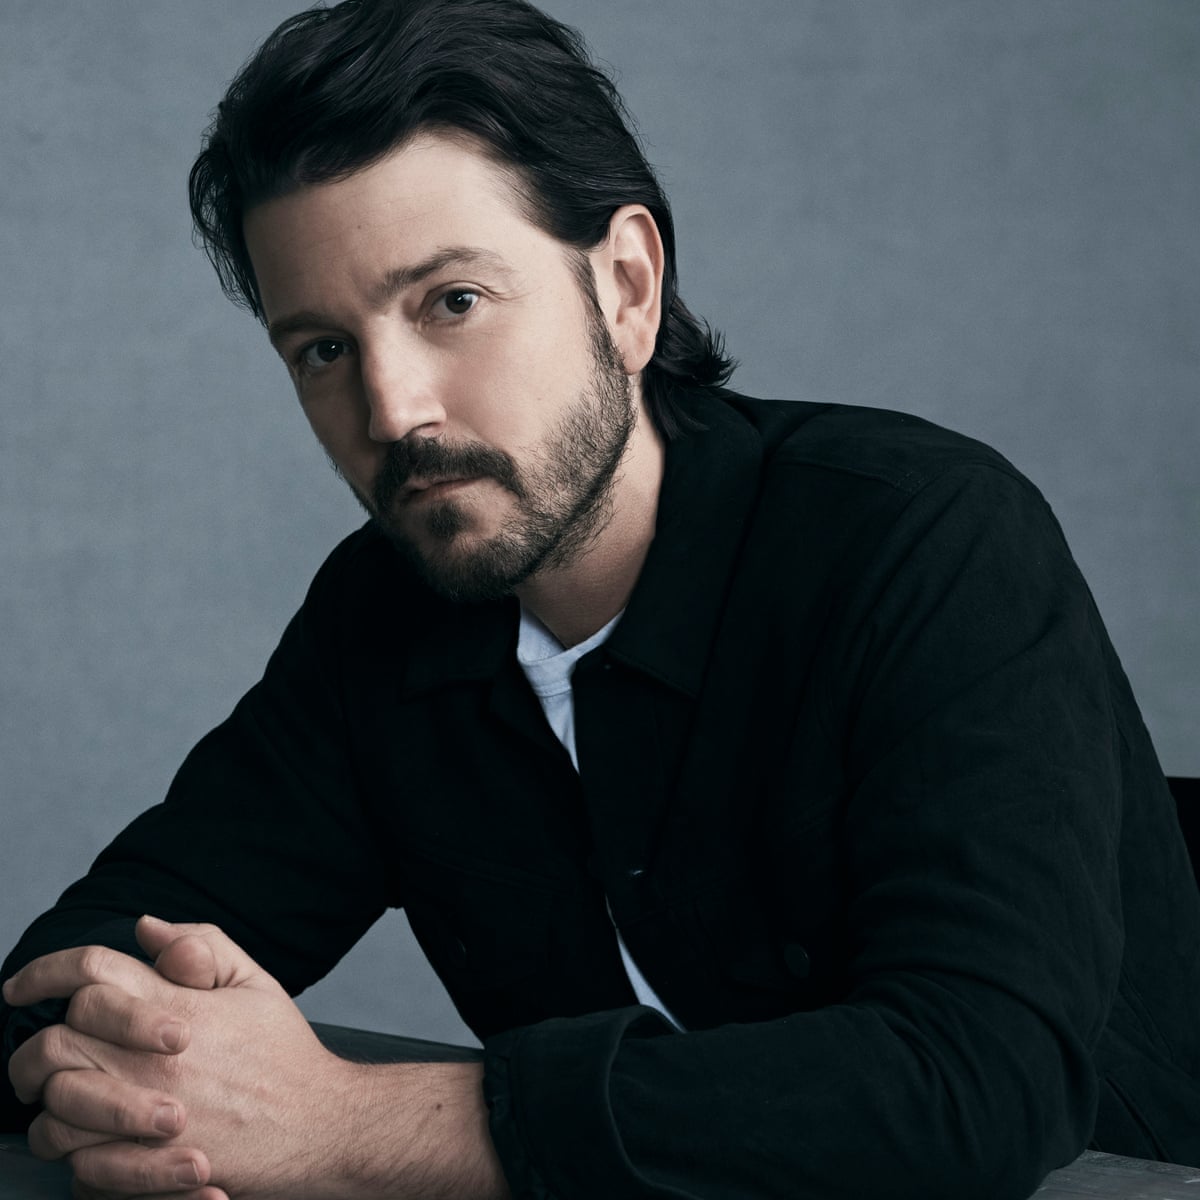 Who is the actor behind Cassian Andor?